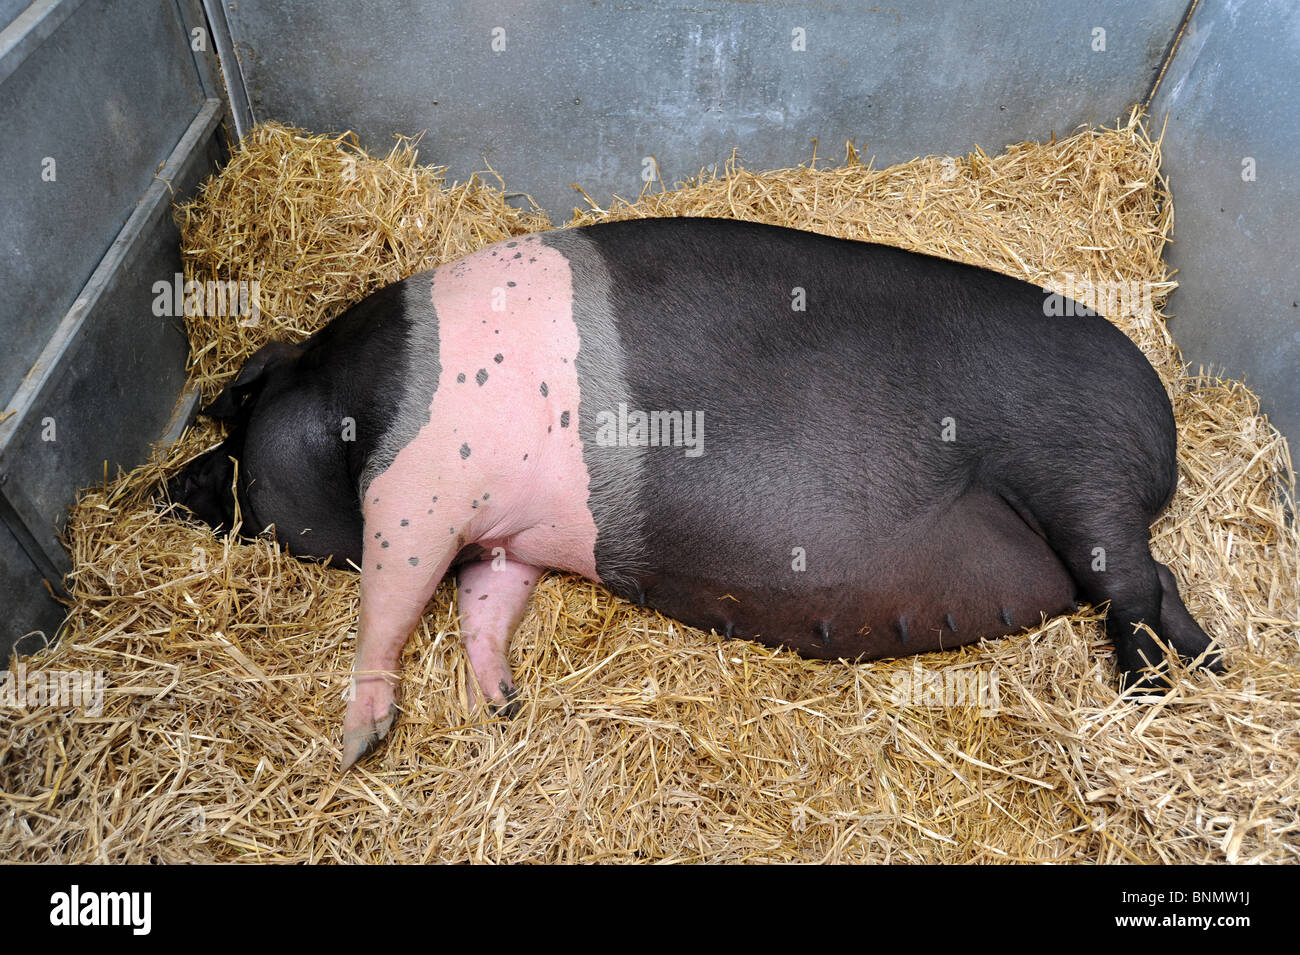 Royal Welsh Show 2010 champion Saddleback sow sleeps in pen after winning rosettes in competition Stock Photo